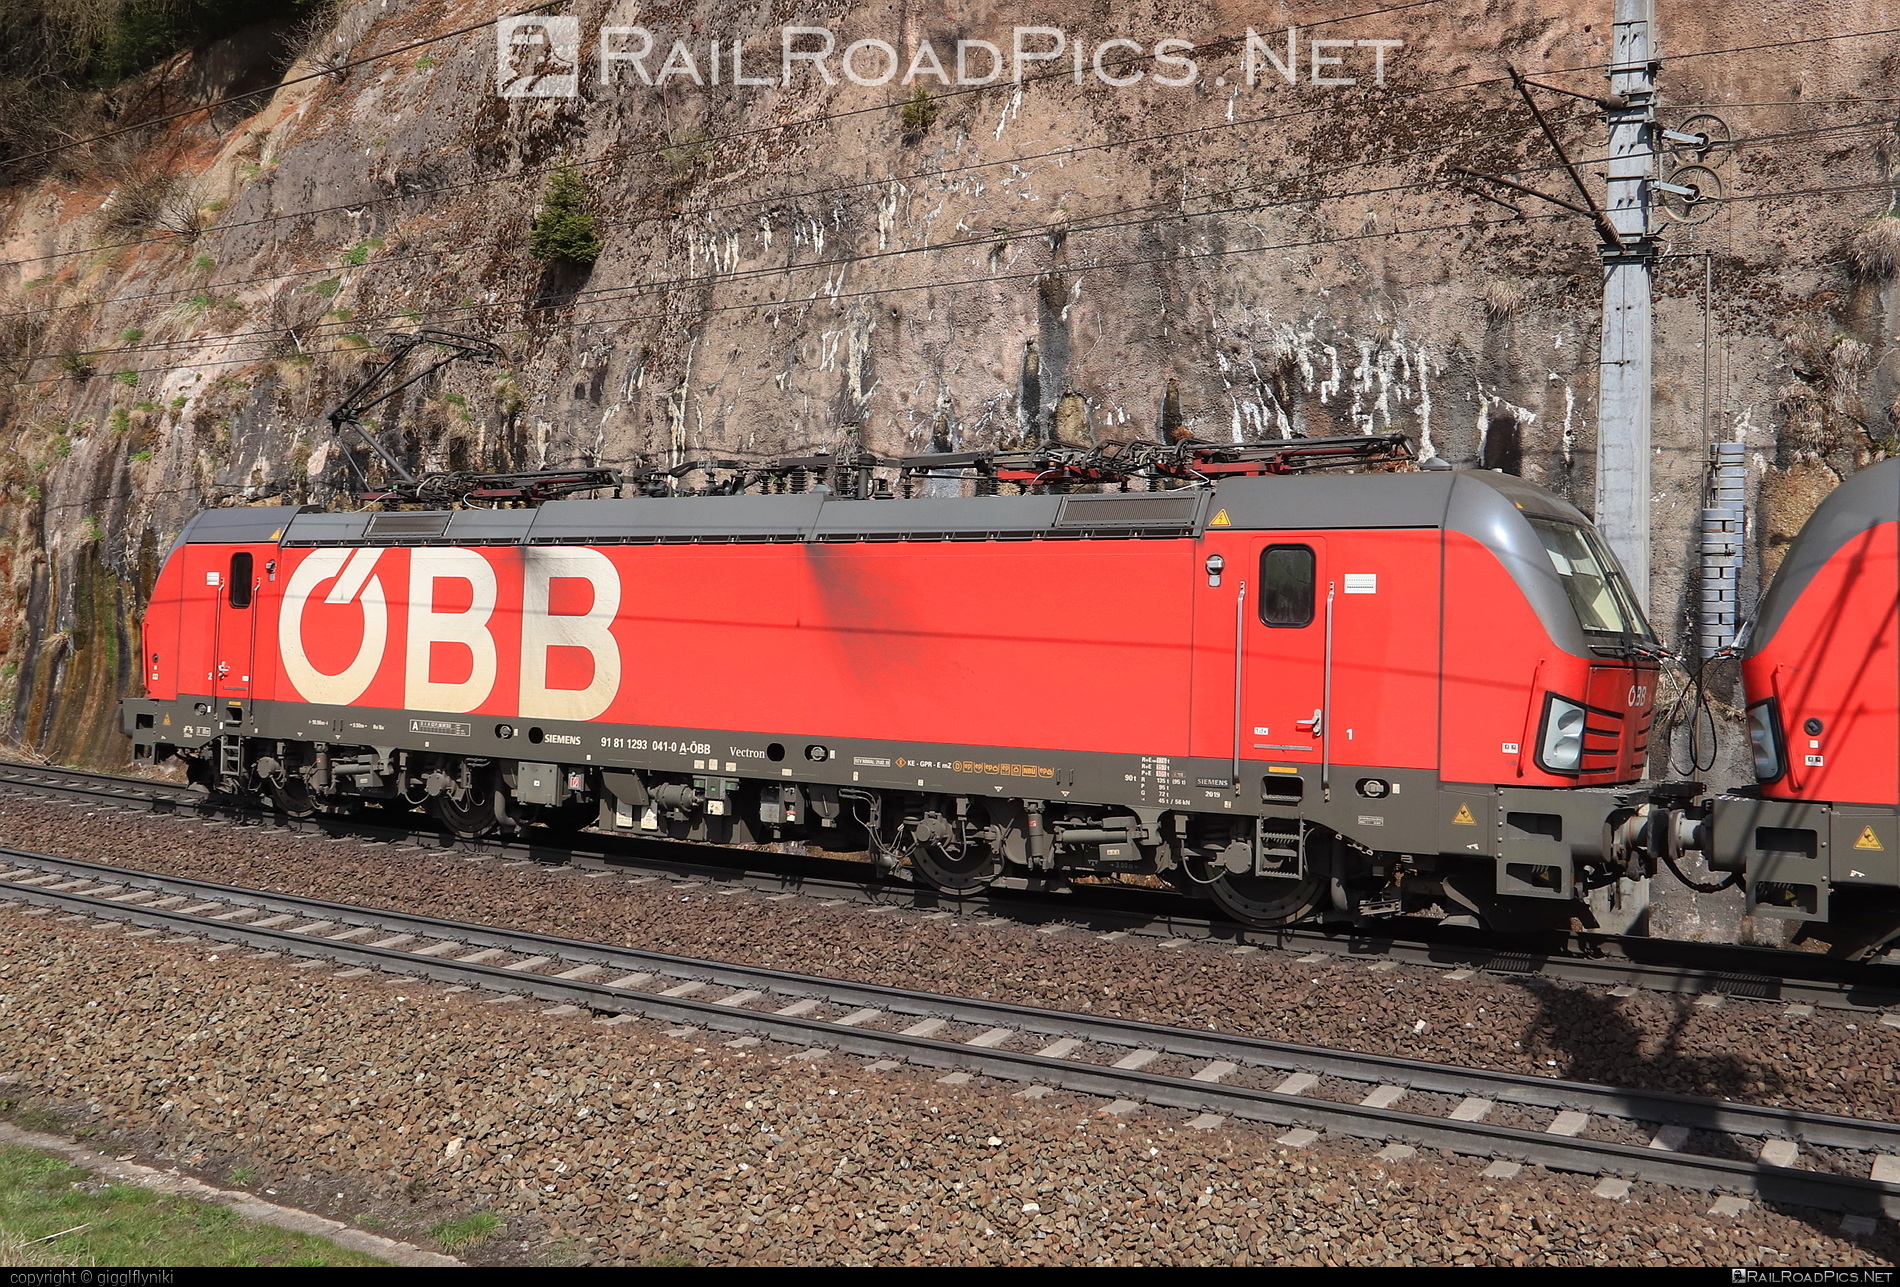 Siemens Vectron MS - 1293 041 operated by Österreichische Bundesbahnen #obb #osterreichischebundesbahnen #siemens #siemensVectron #siemensVectronMS #vectron #vectronMS